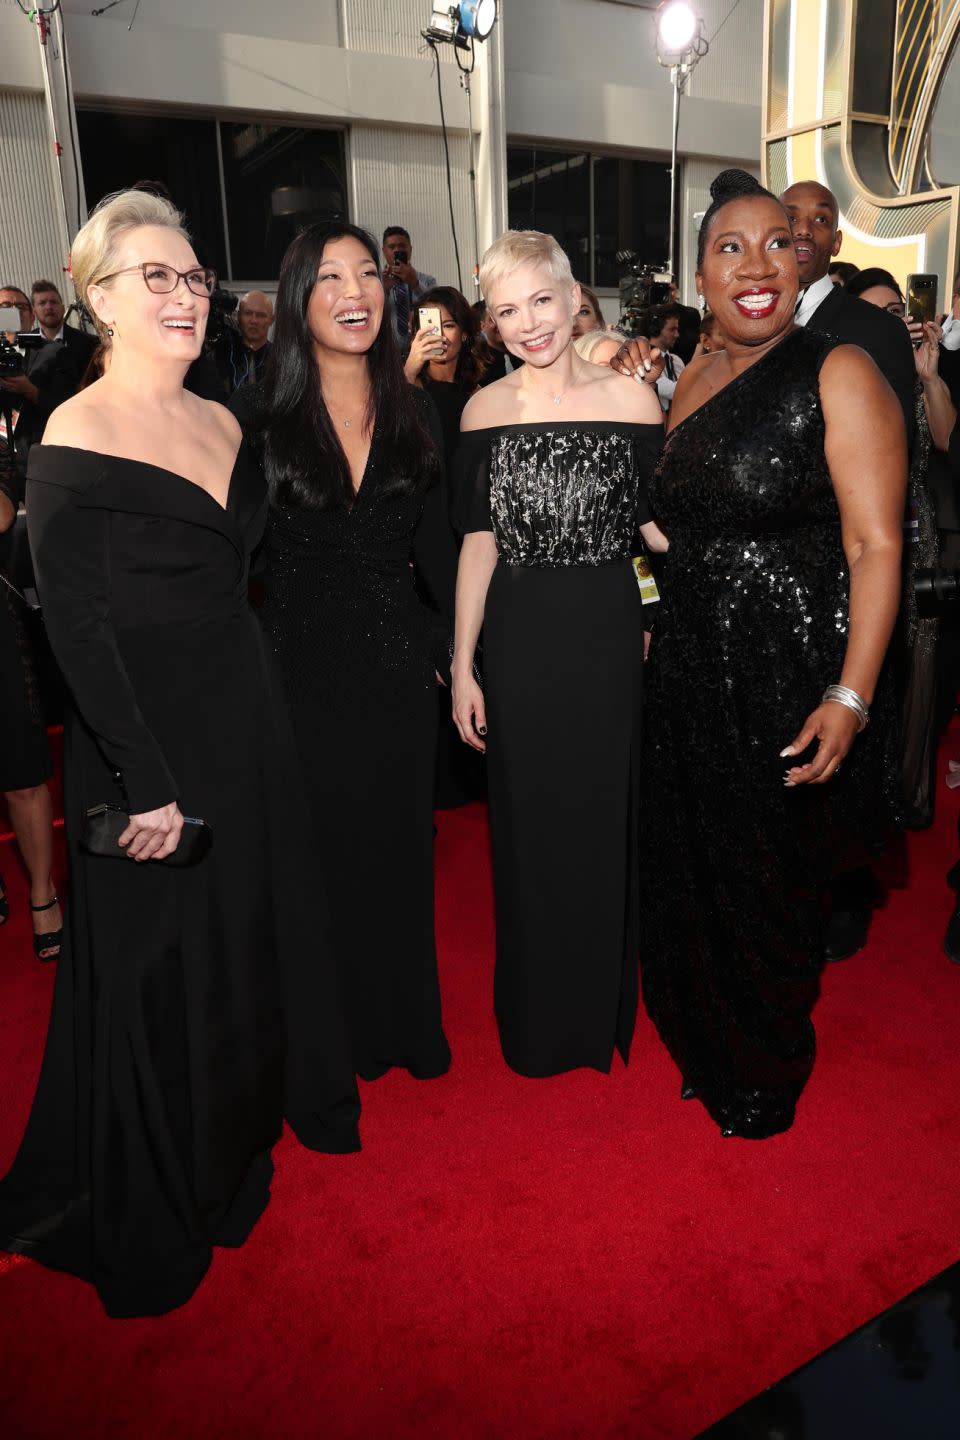 Actresses Meryl Streep and Michelle Williams with activists Ai-jen Poo and Tarana Burke. Photo: Getty